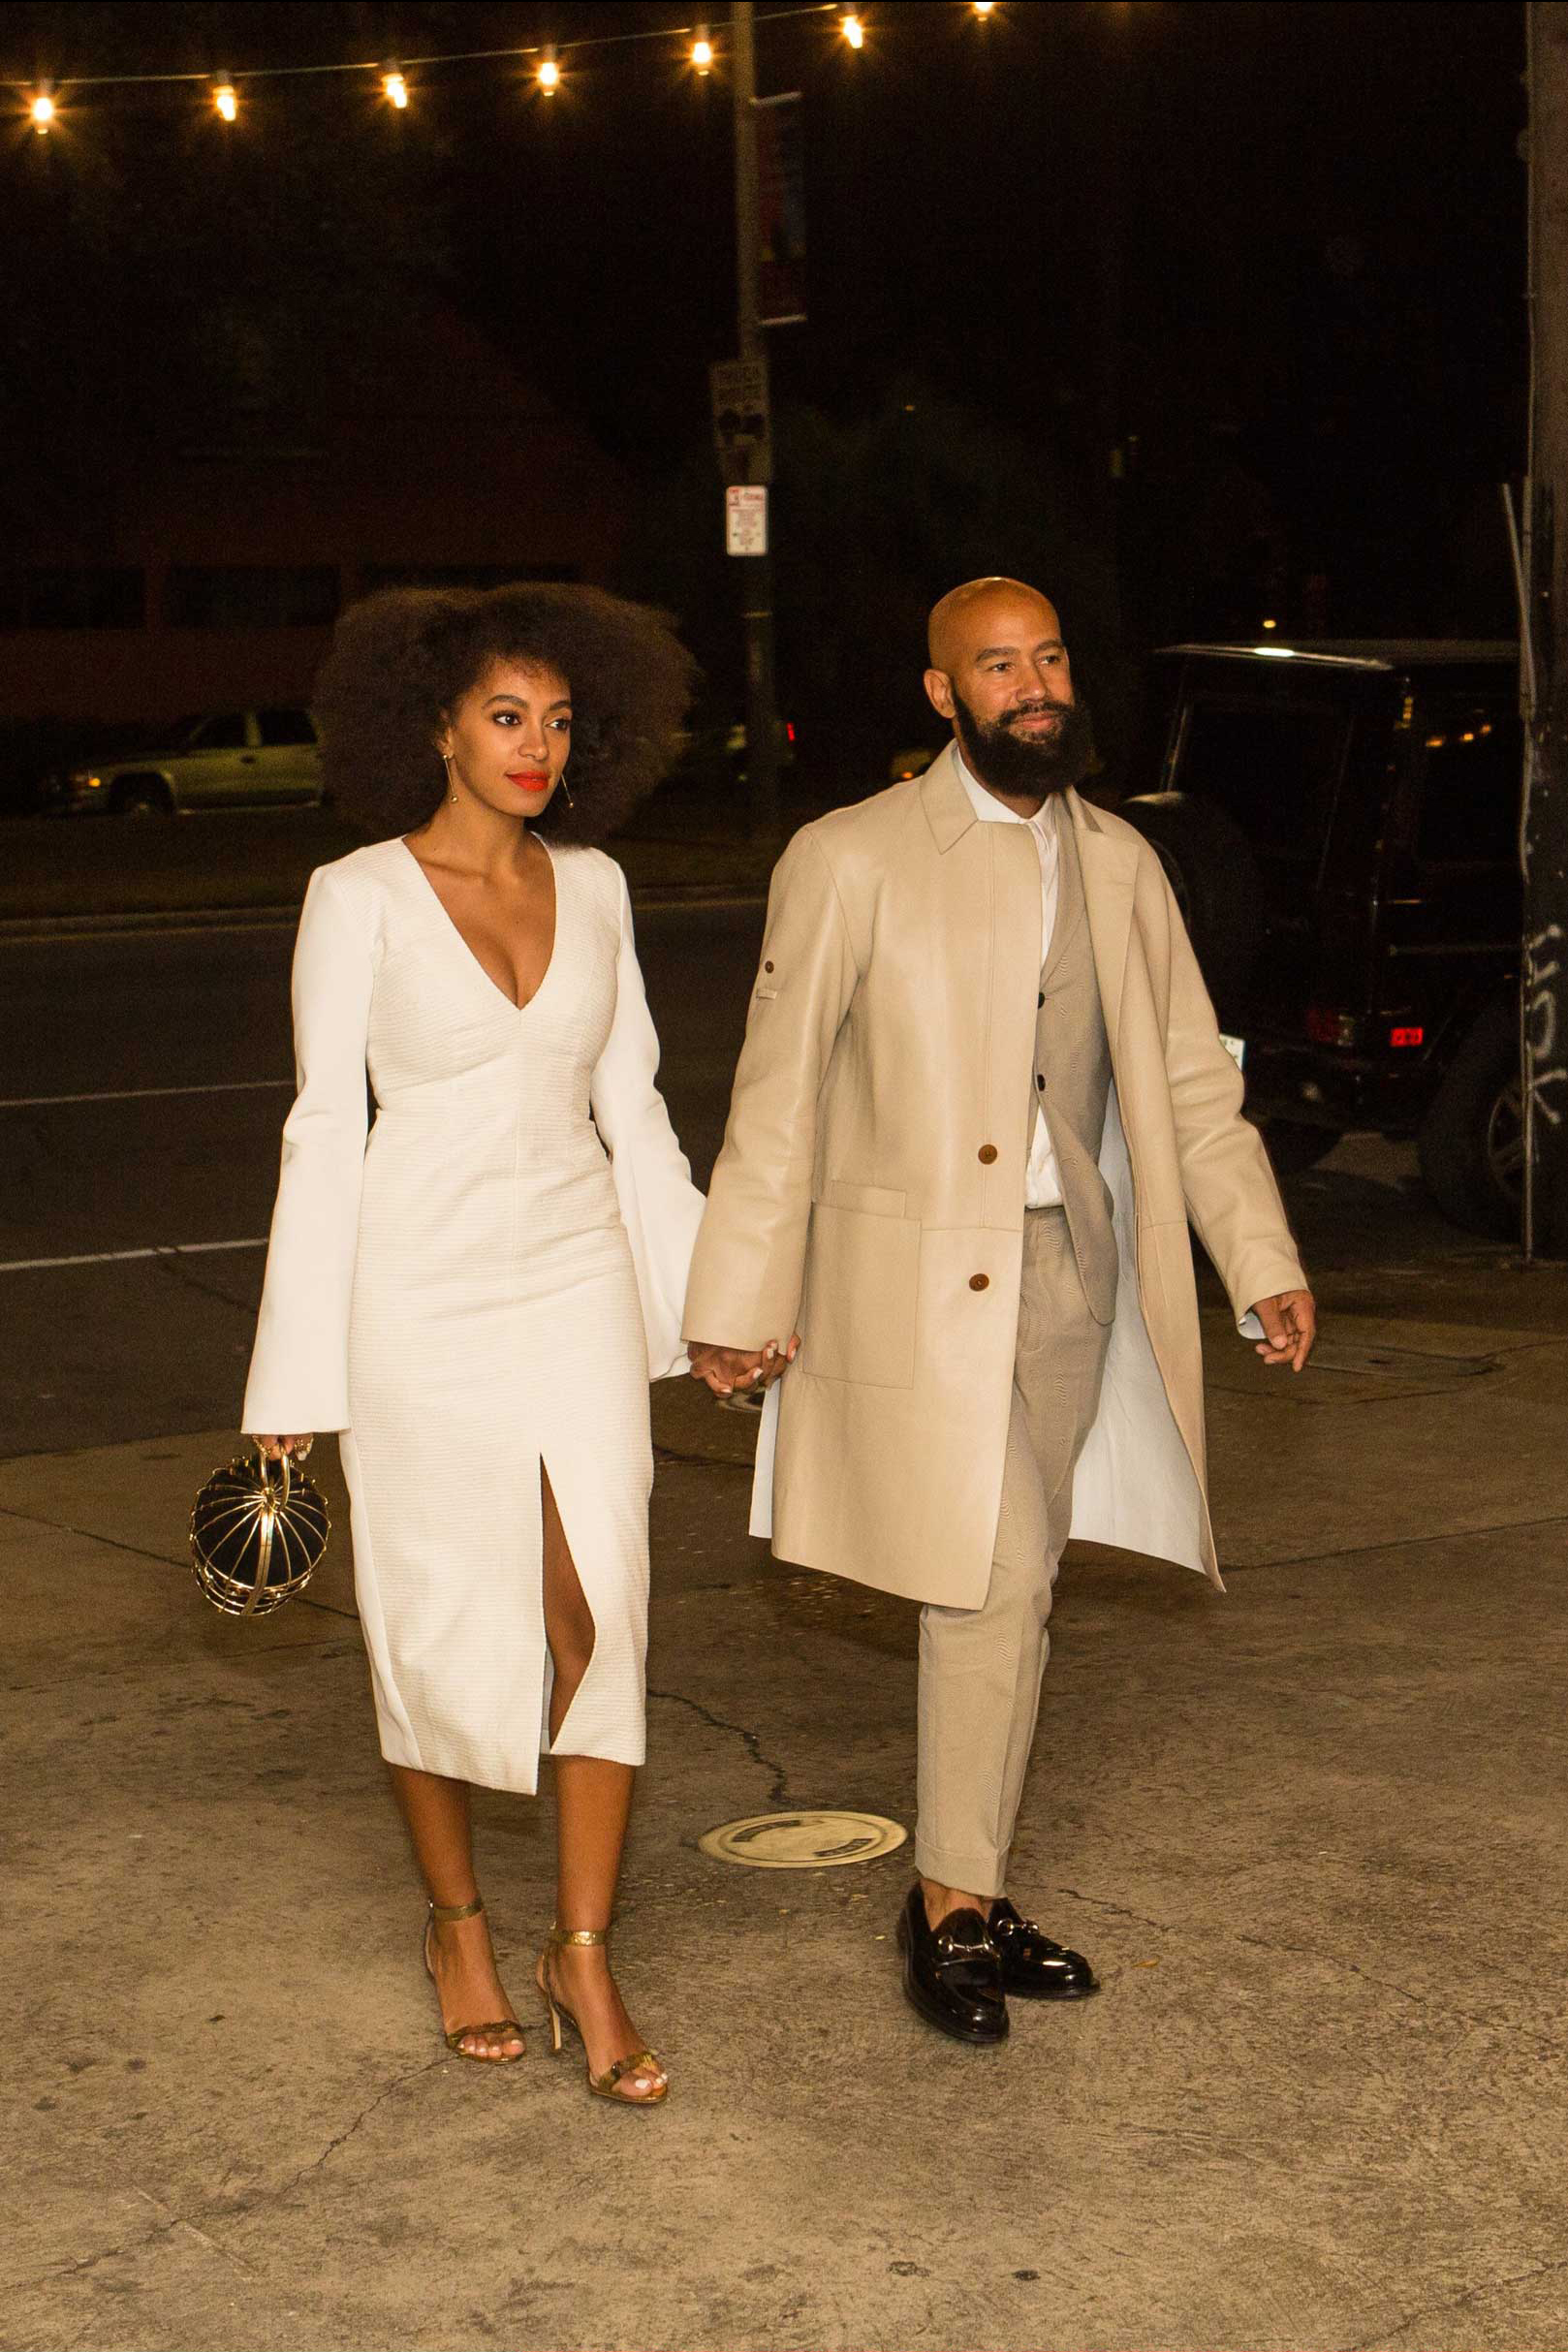 Musician Solange Knowles (L) and her fiancee, music video director Alan Ferguson, are seen outside the Indywood Cinema in New Orleans on Nov. 14, 2014. (Josh Brasted—GC Images/Getty Images)